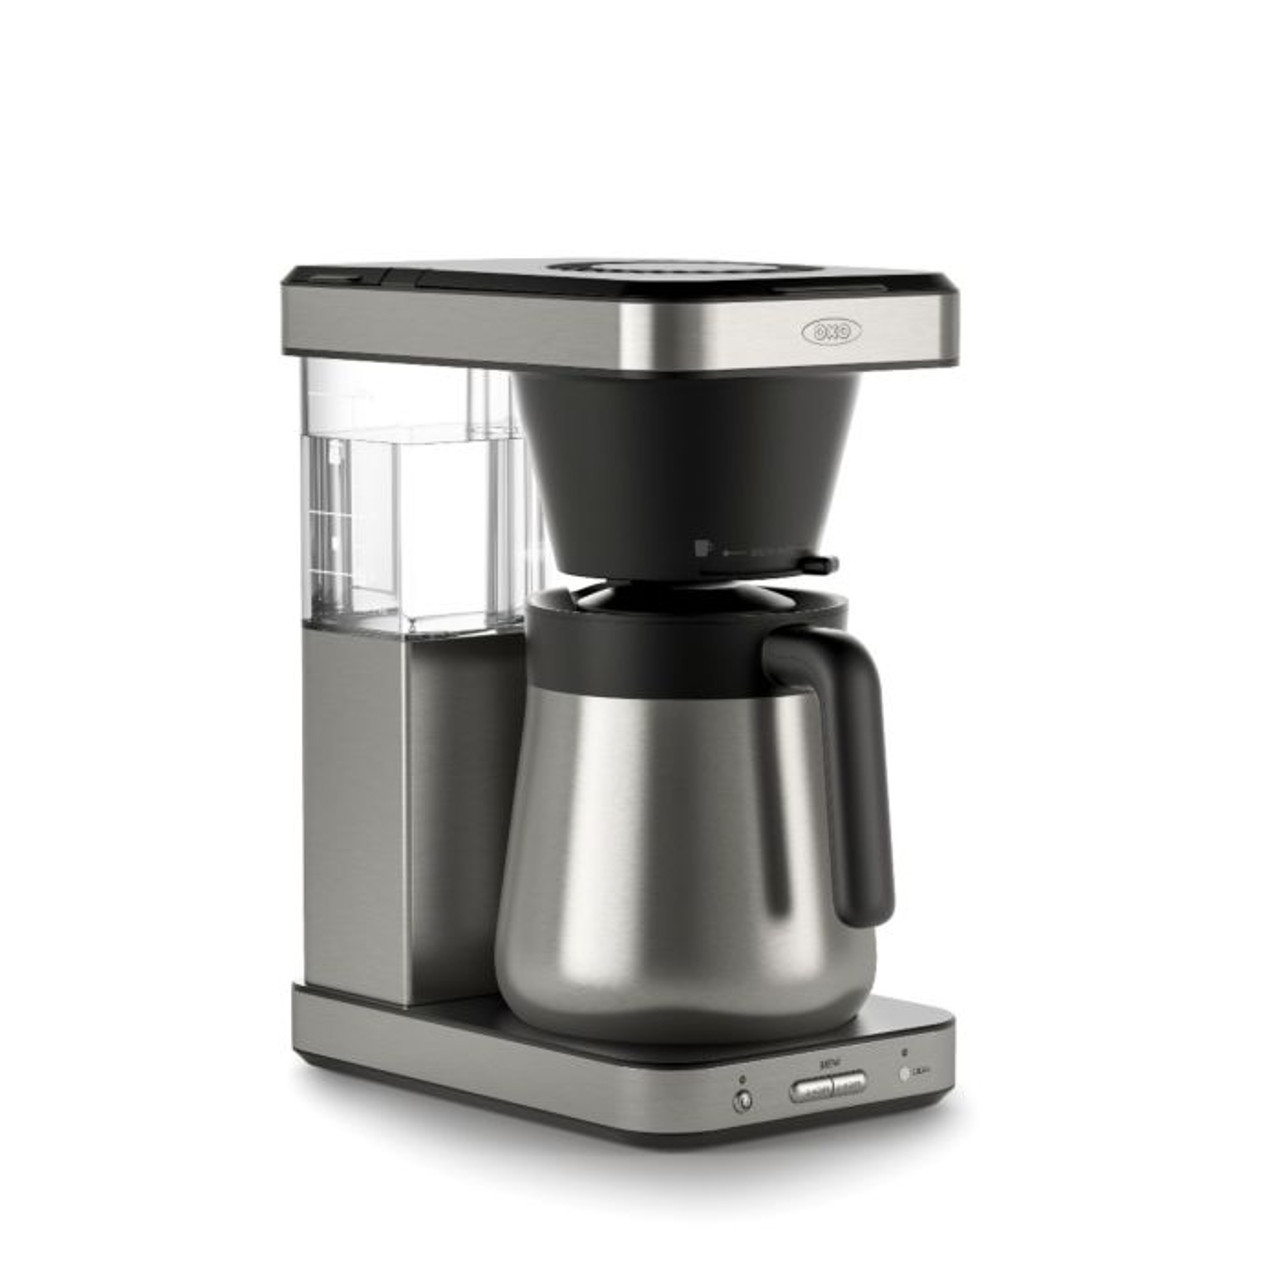 OXO Brew 12-Cup Coffee Maker Review